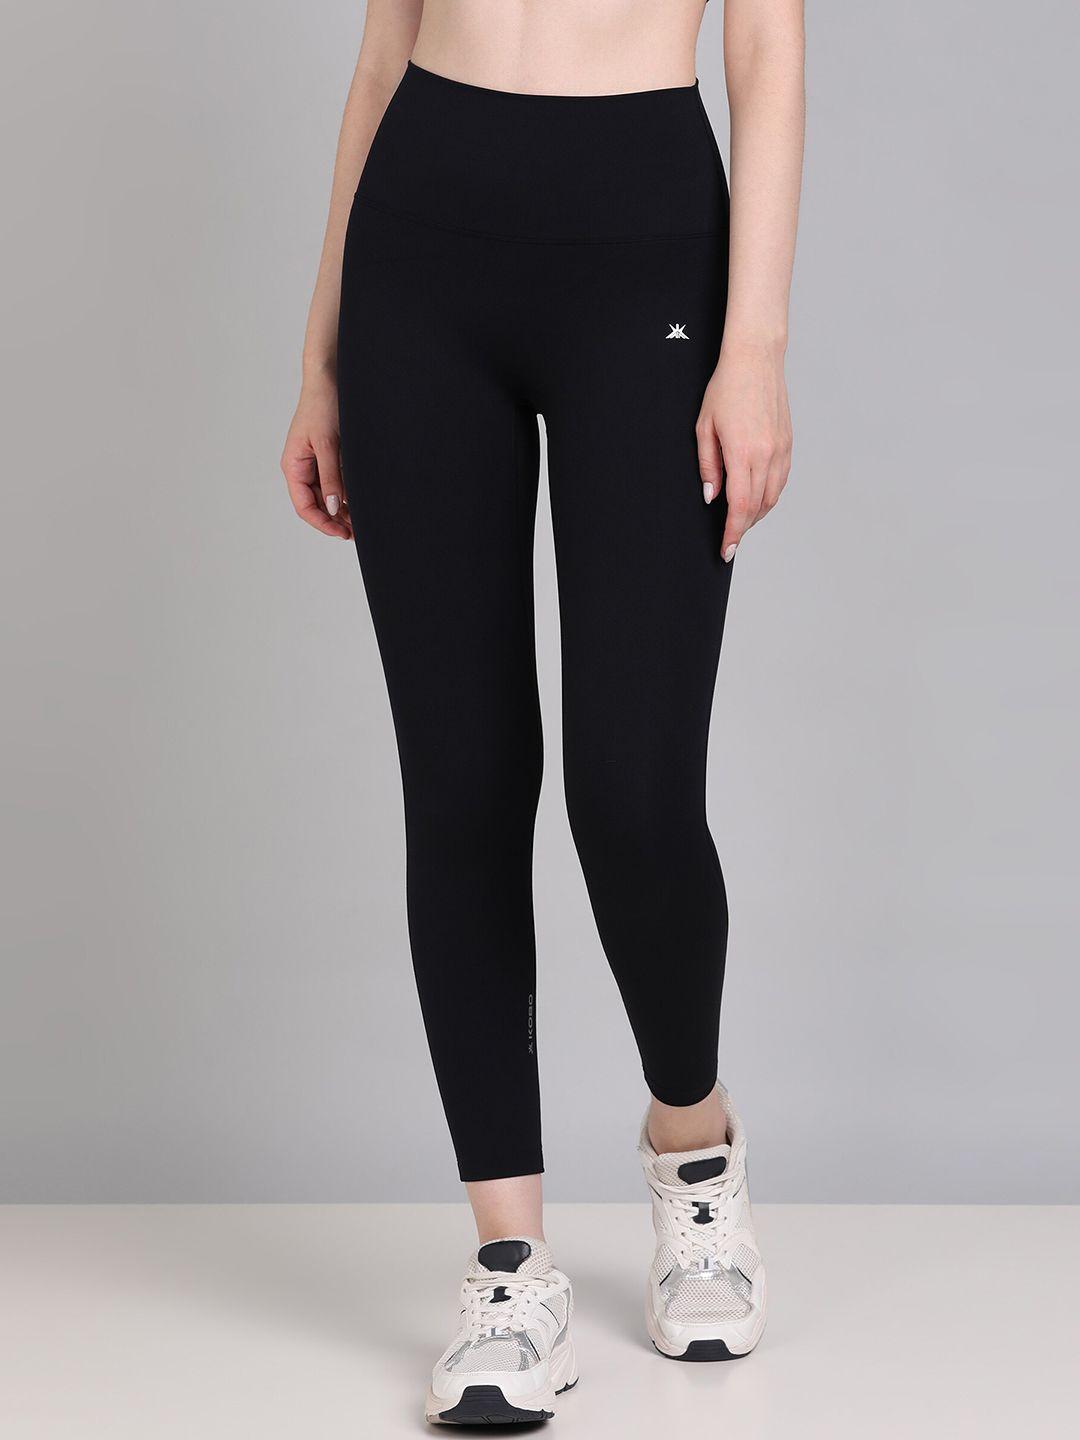 kobo ankle length tights